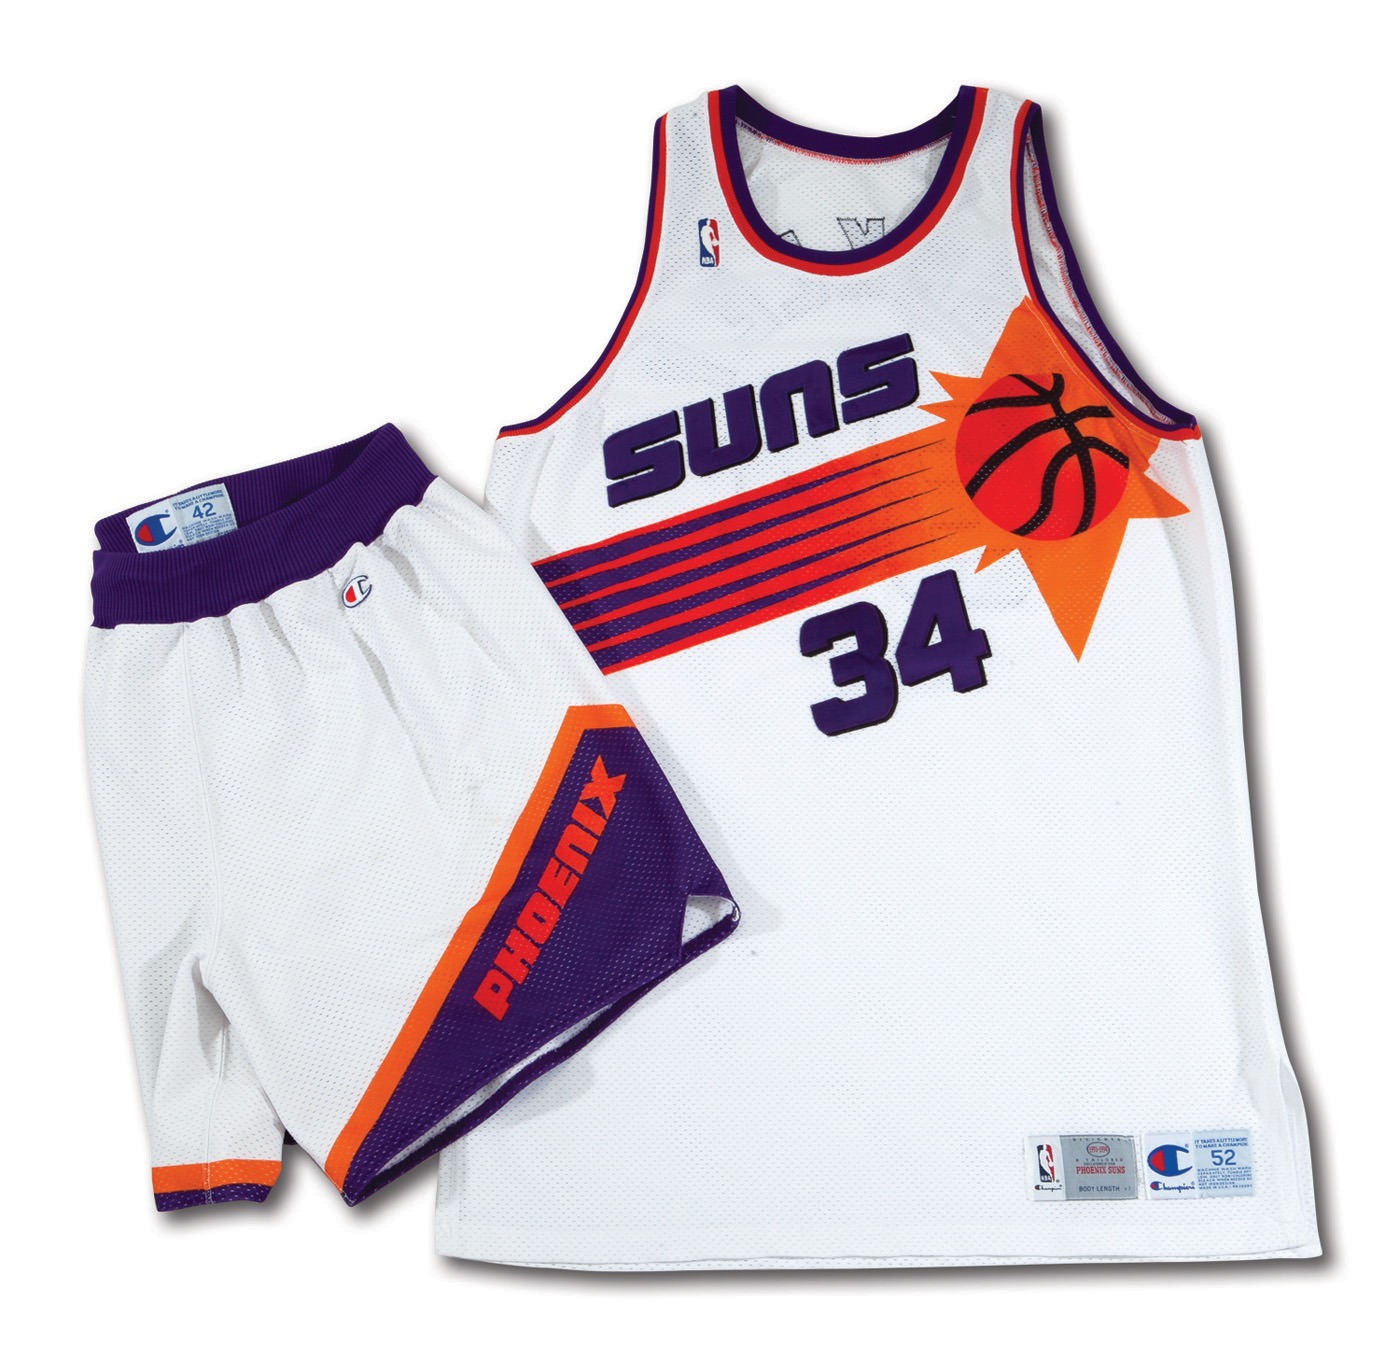 Collectable Presents: A Charles Barkley game-worn Suns jersey 